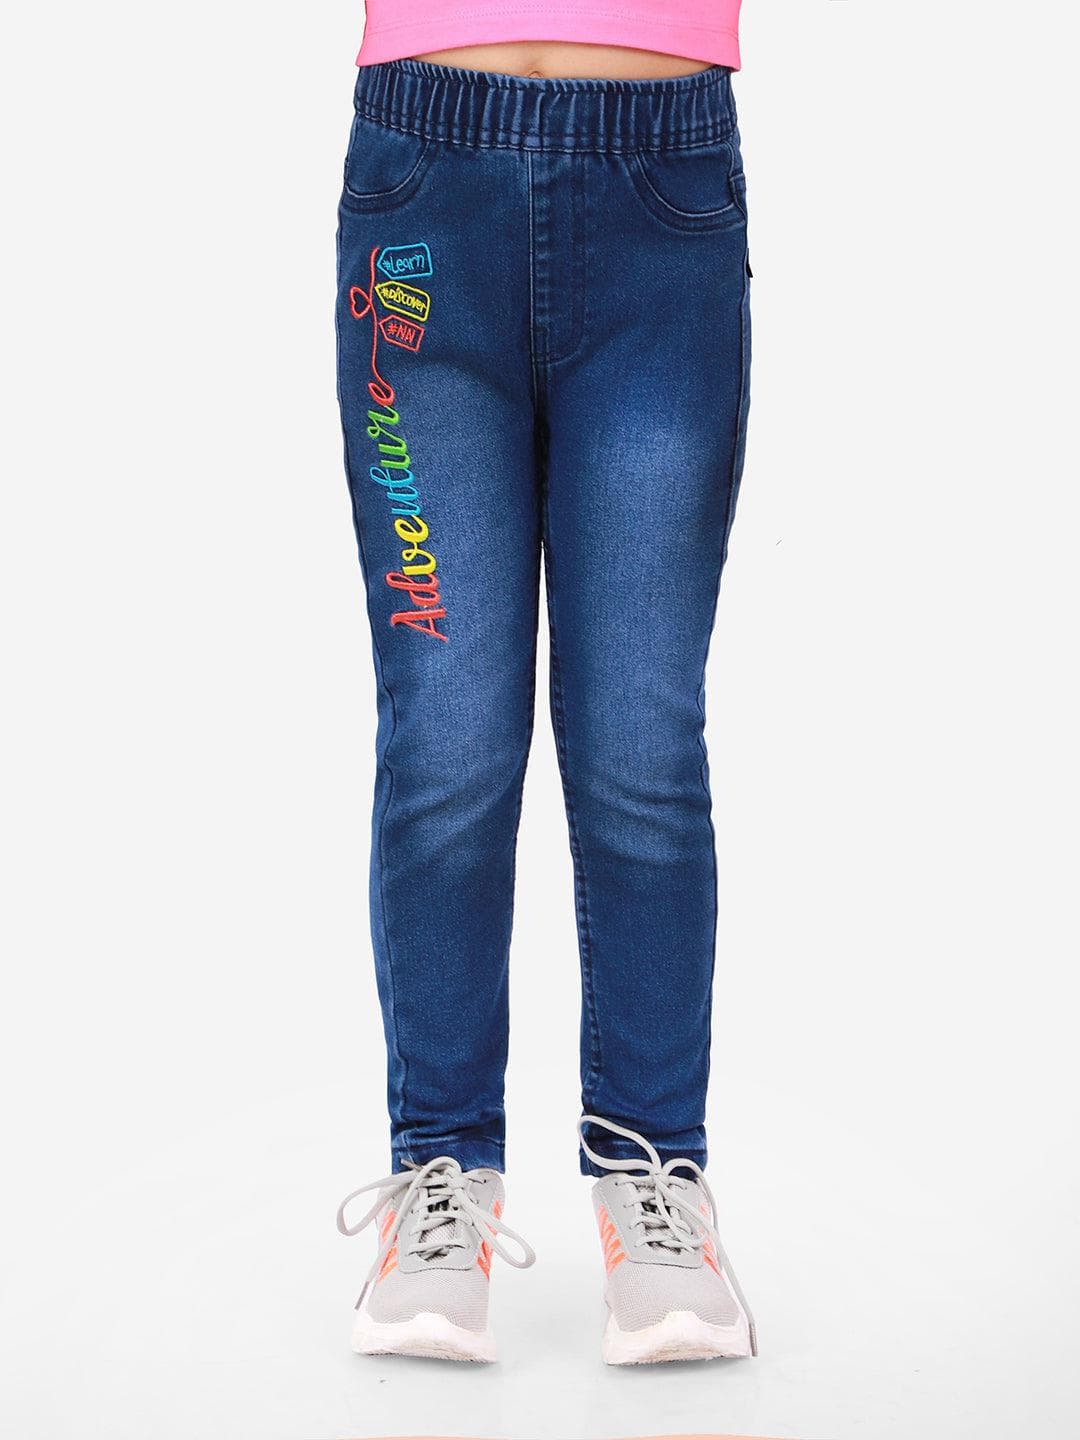 Naughty Ninos Girls Stretch Denim Jeggings for 5 to 15 years